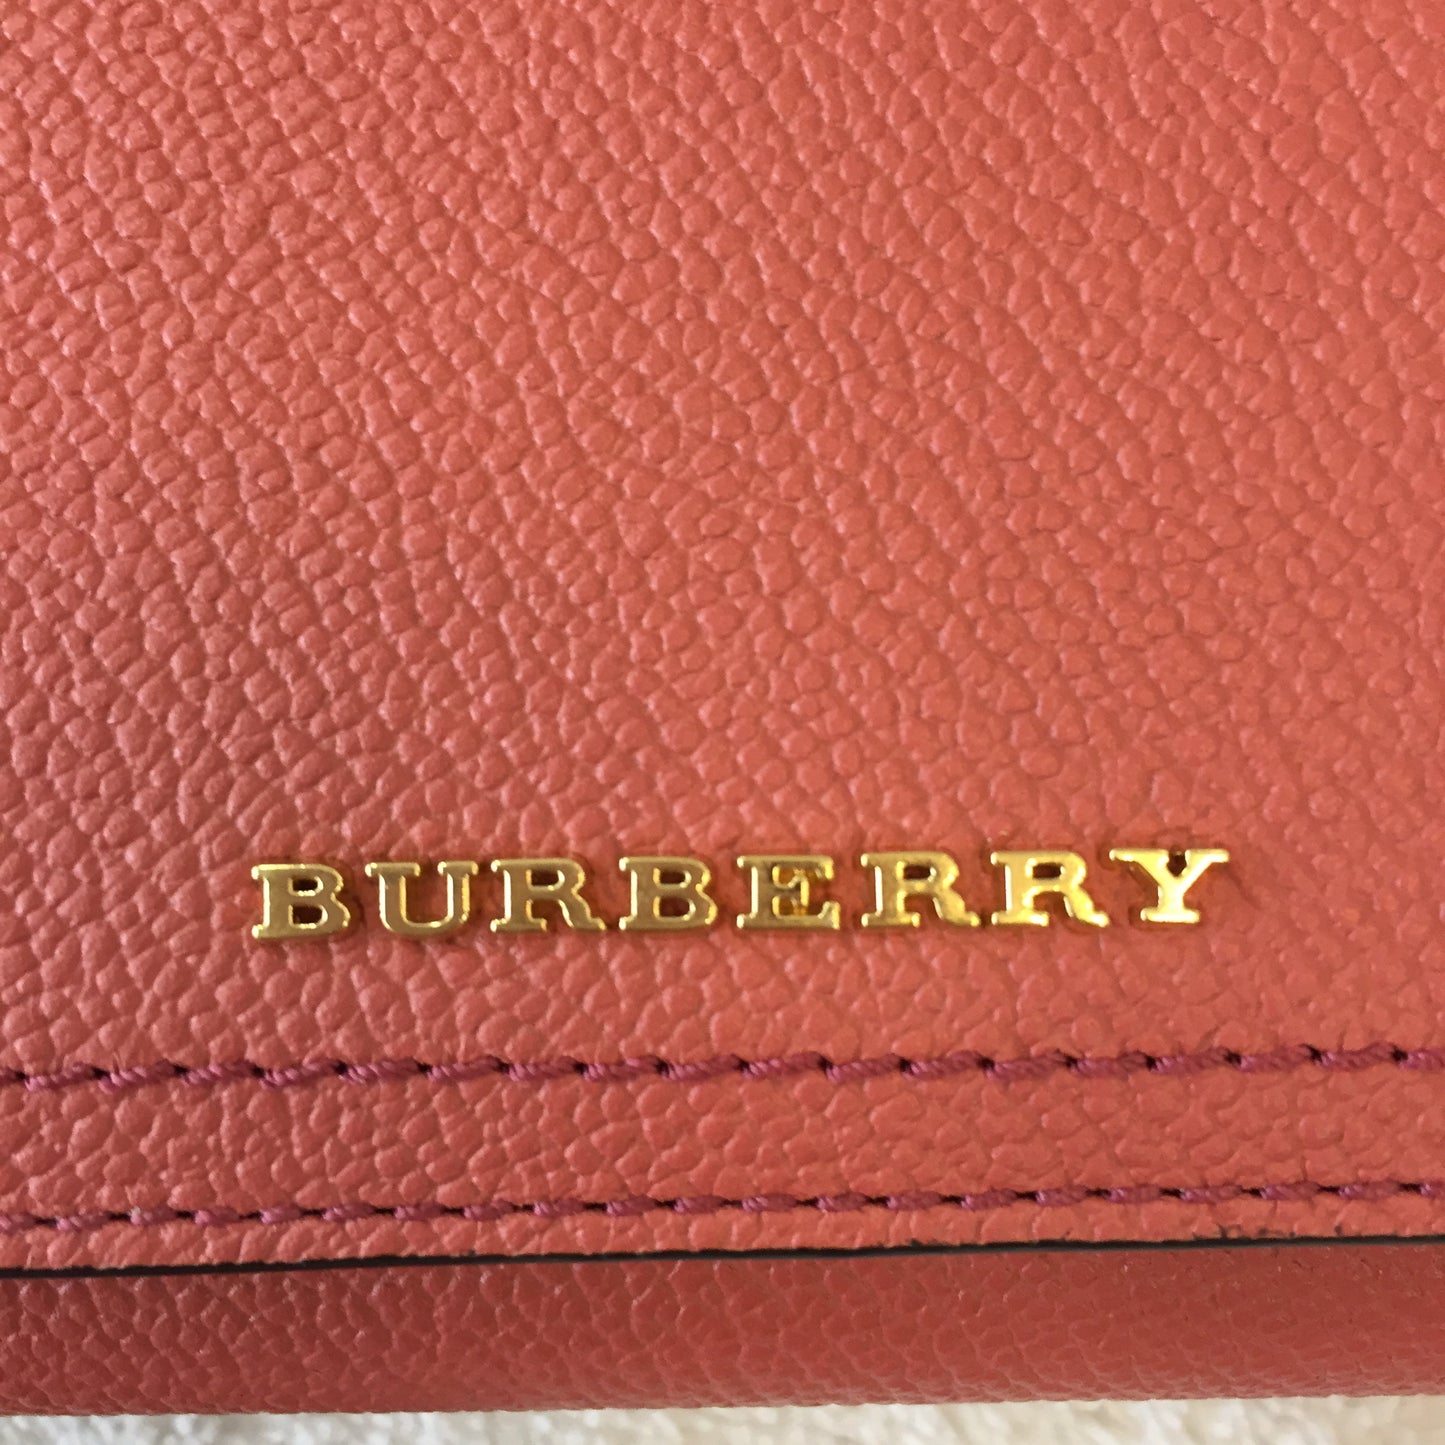 Authentic Burberry Salmon Soft Grain Leather Wallet With Card Case